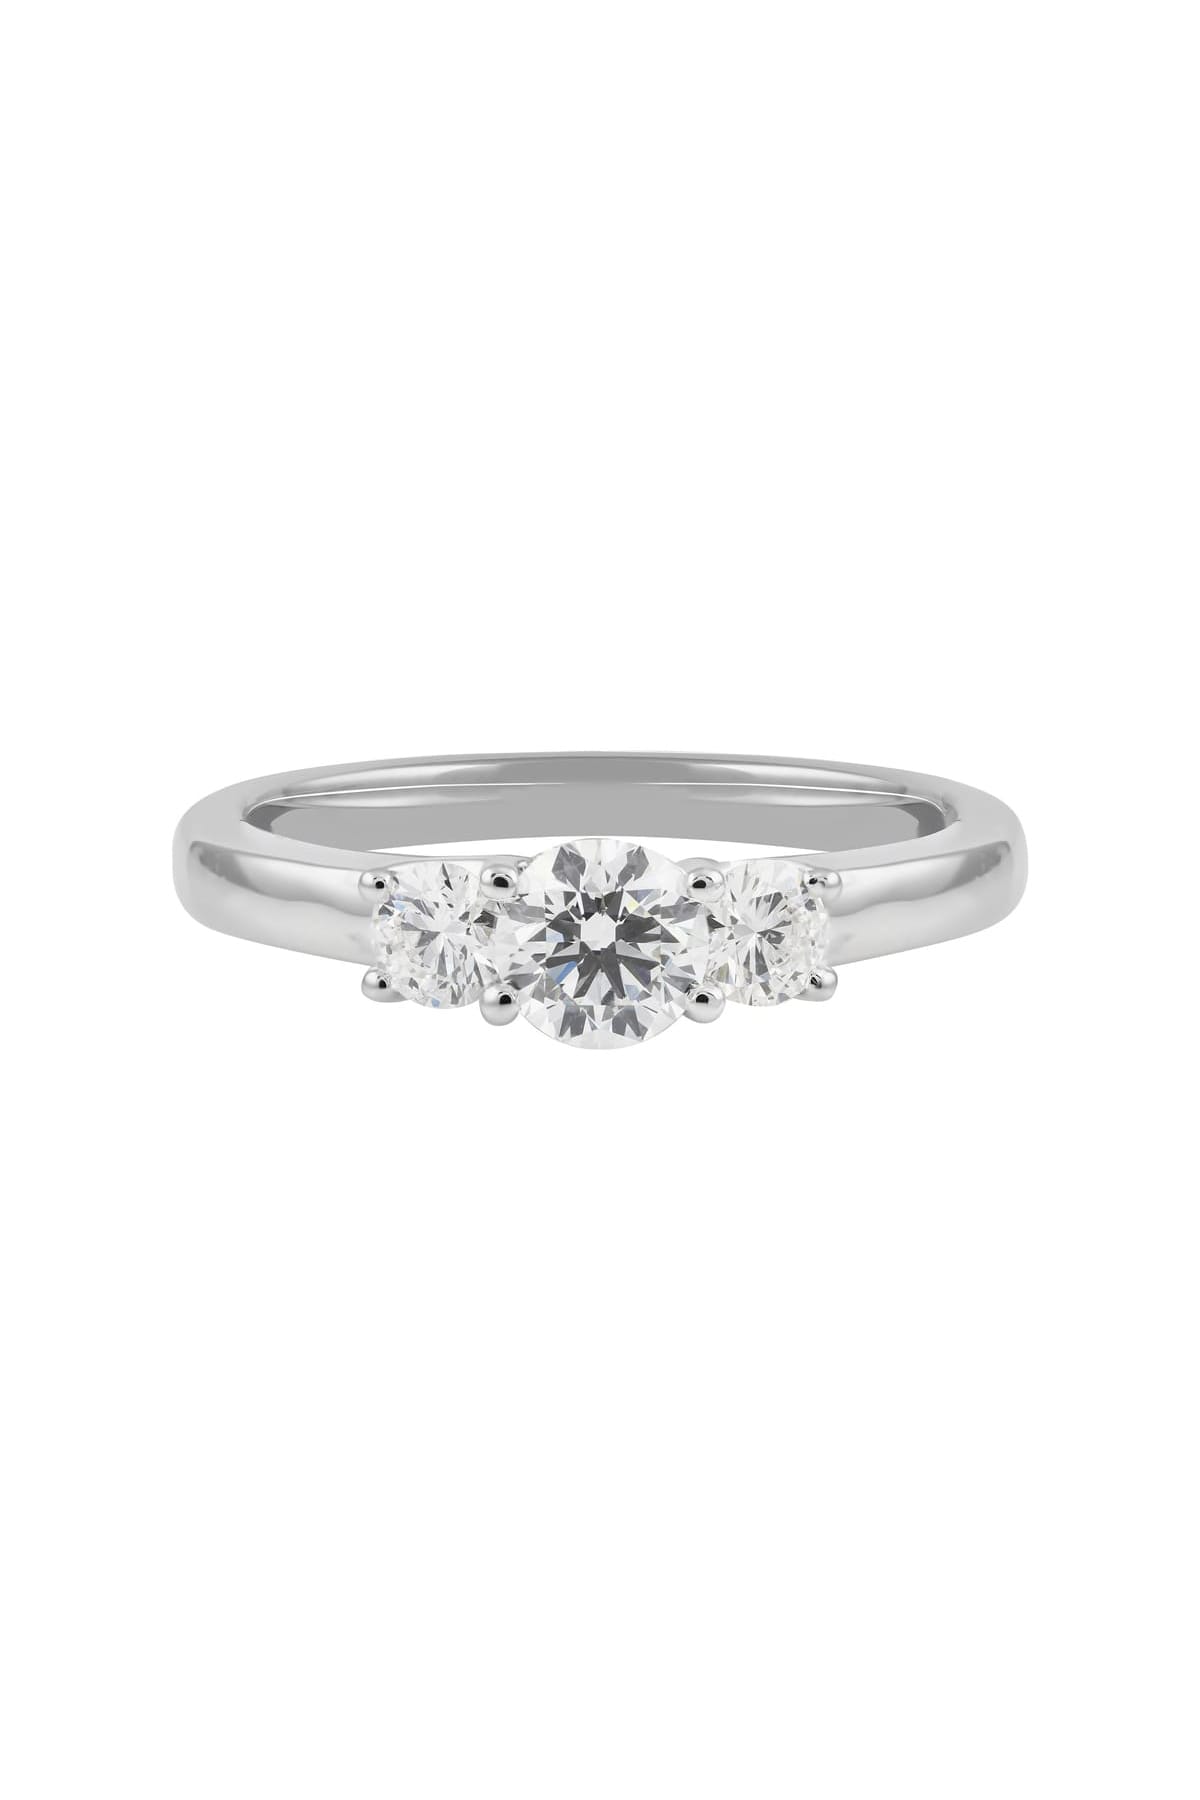 3 Stone Ring set in 18ct White Gold available at LeGassick Diamonds and Jewellery Gold Coast, Australia.